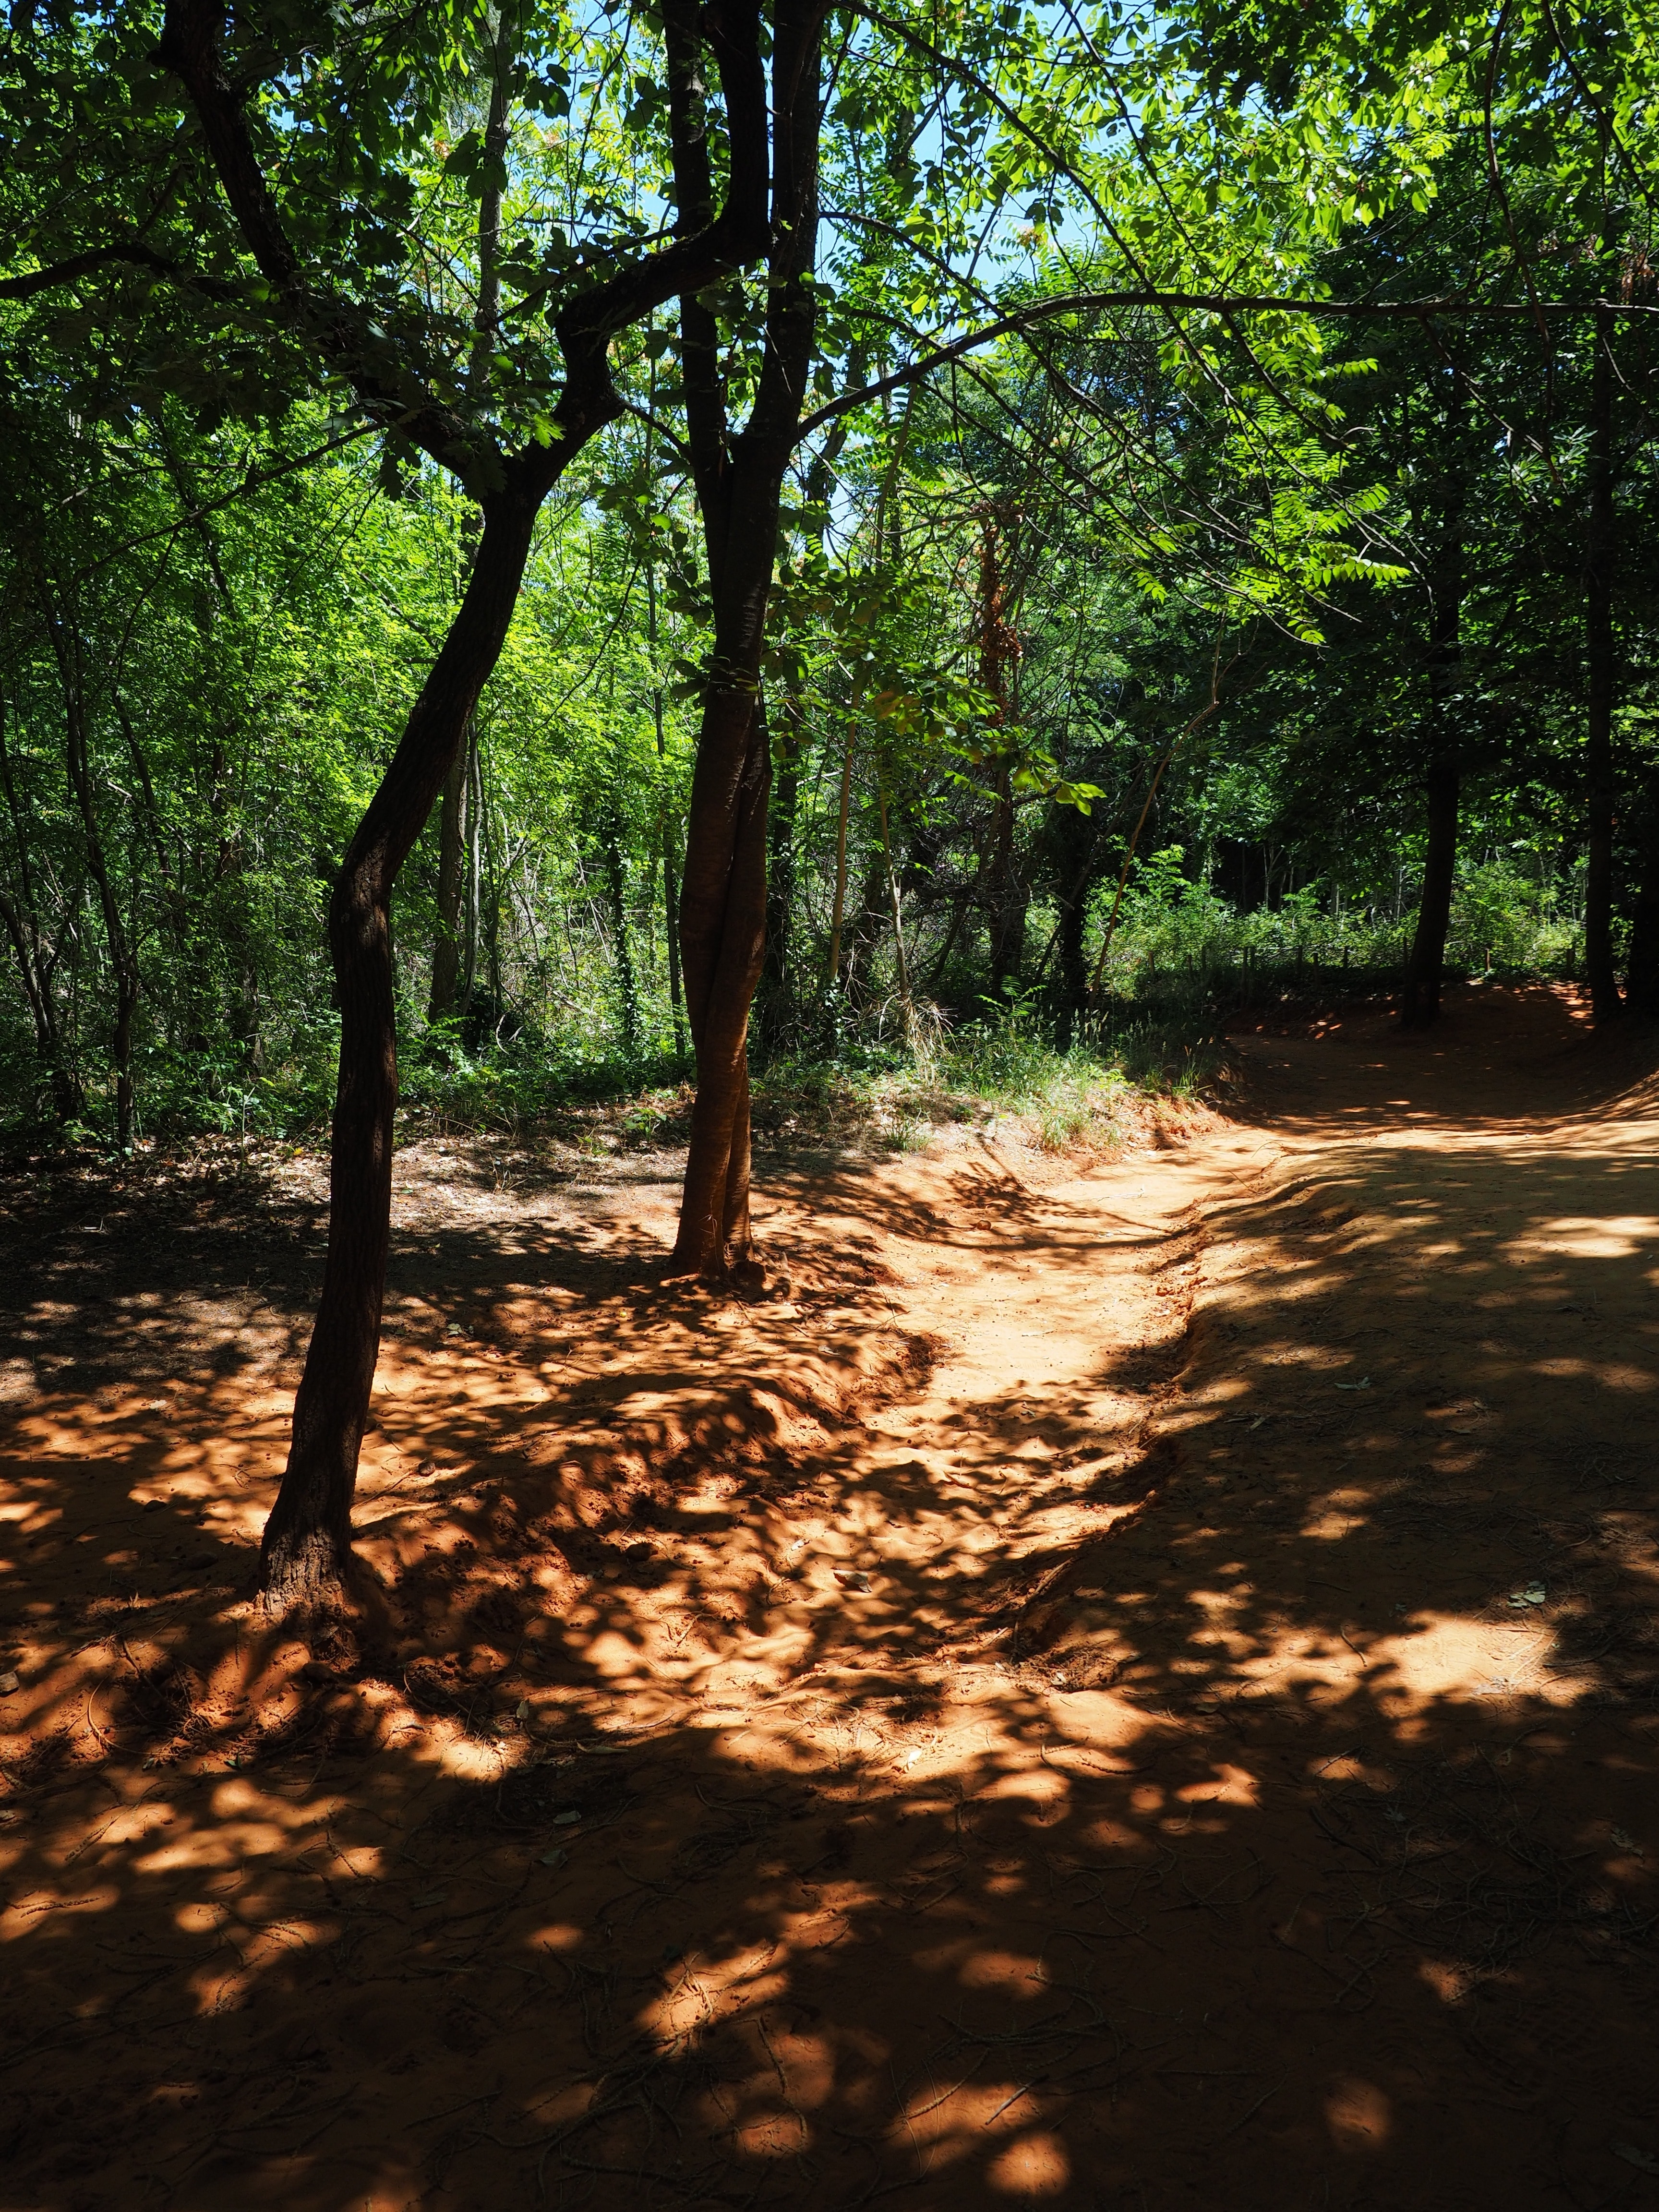 Sand Road, Road Dust, Forest, Nature, tree, forest